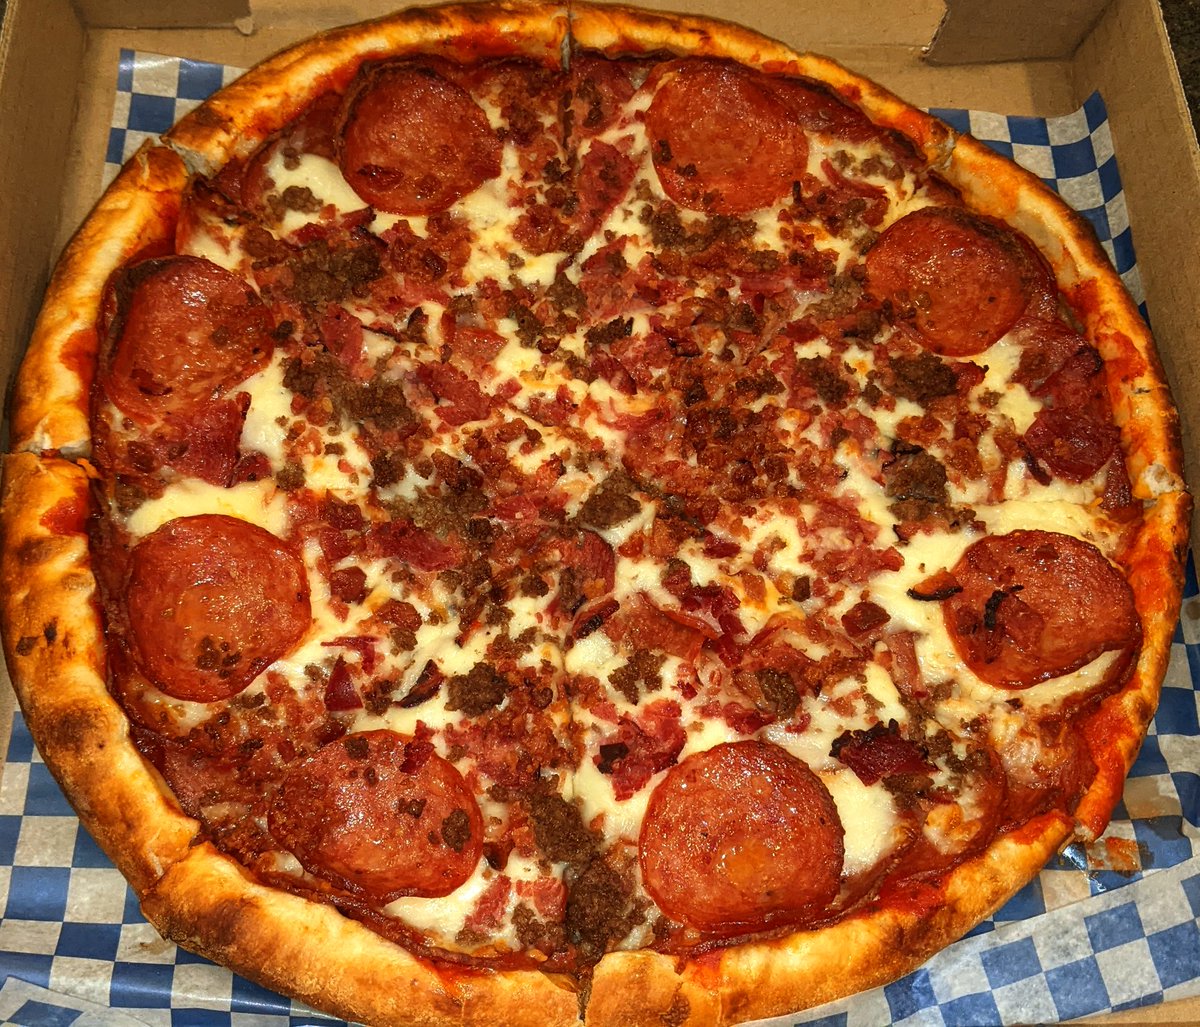 This was a magnificent meat lovers #pizza from #mariospoutineandpizza #yeg #yegfood #yegeats #edmonton